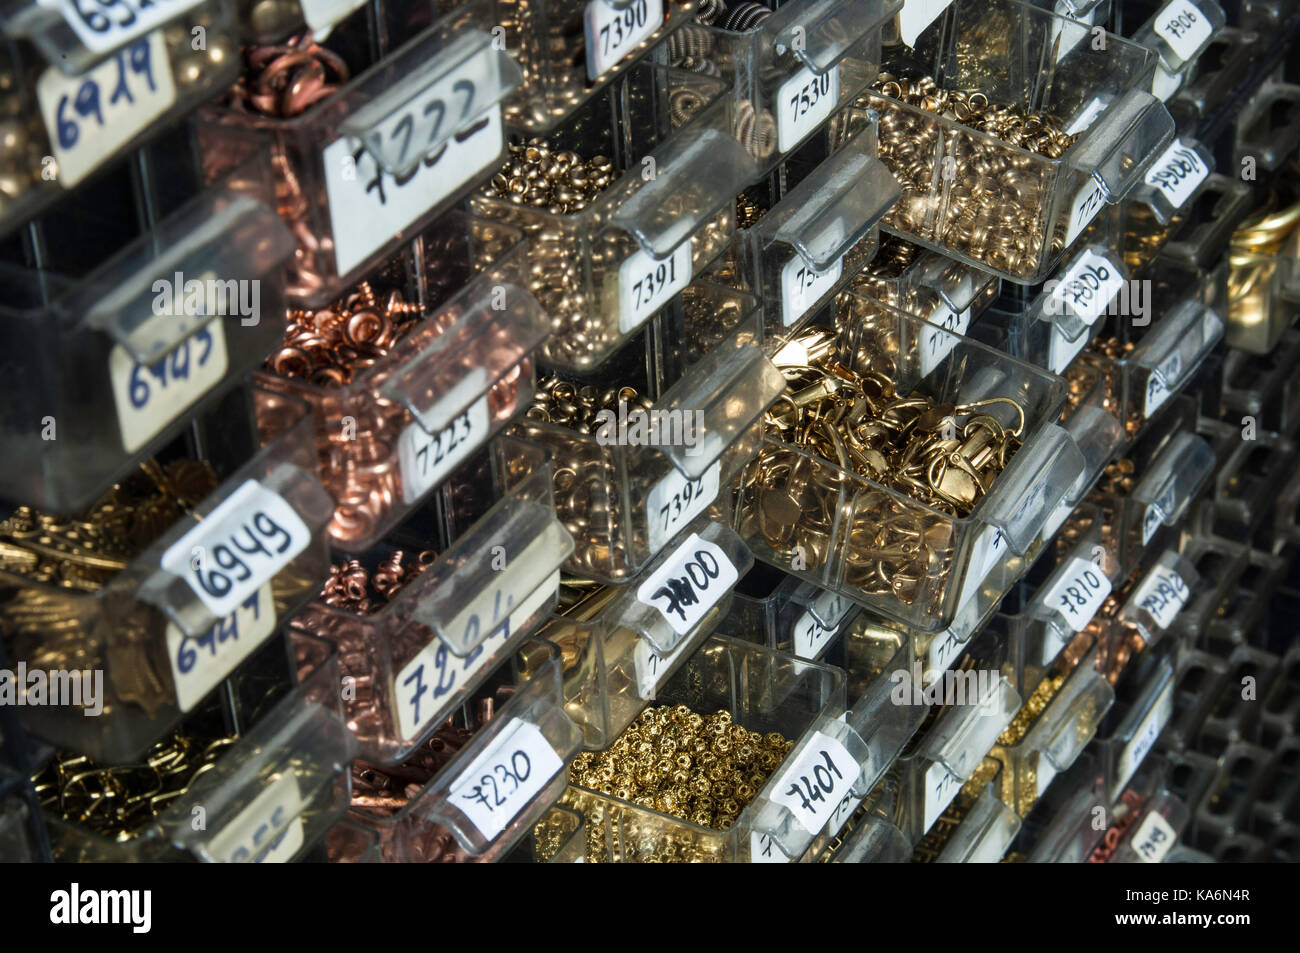 Small jewellery components in factory sampling store. Stock Photo